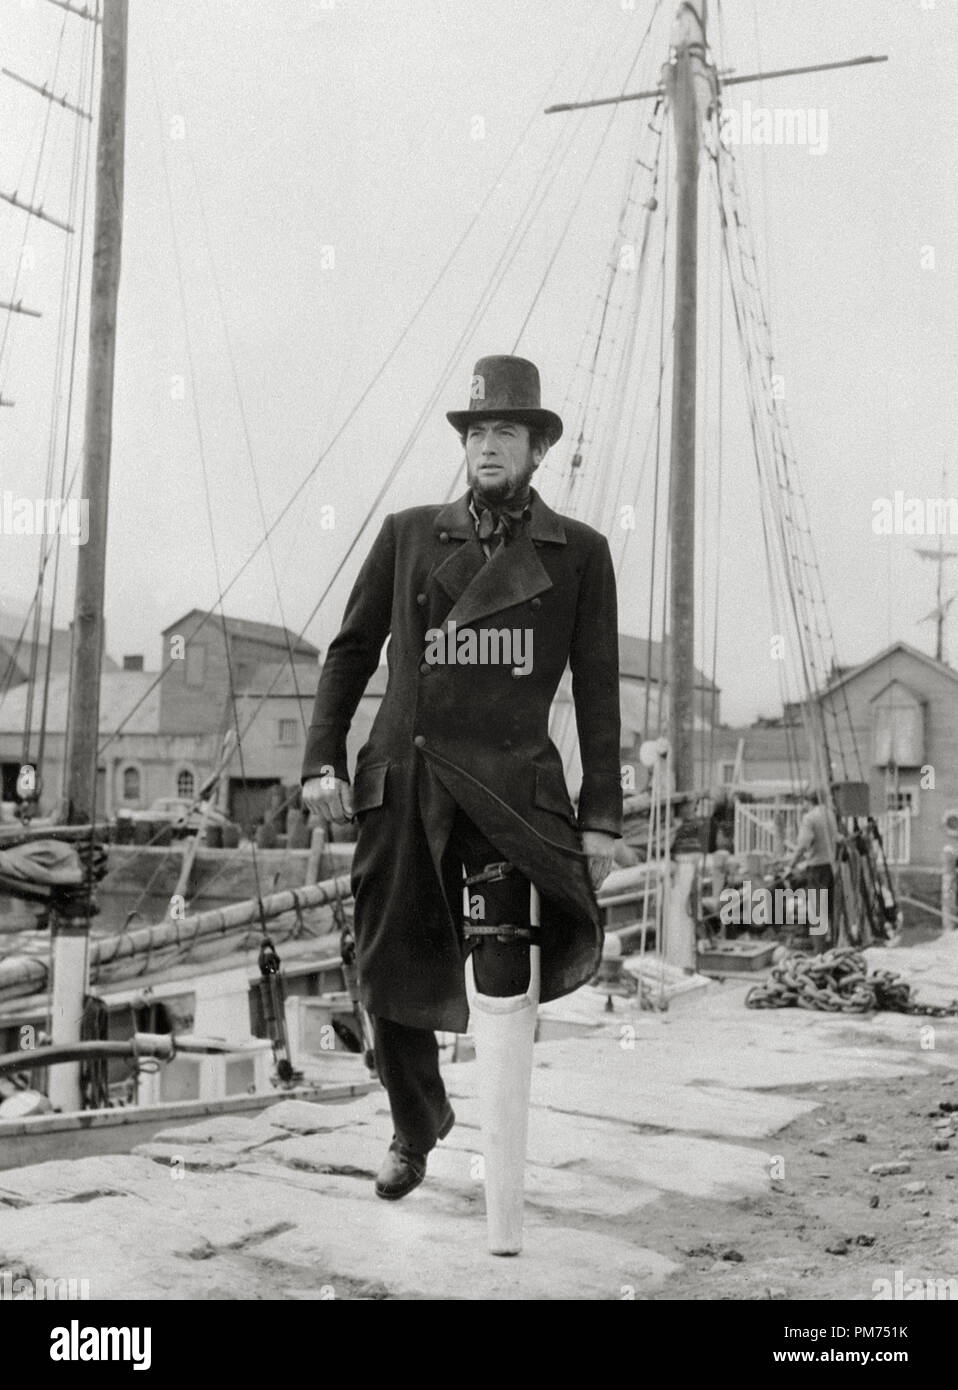 Gregory Peck as Captain Ahab, "Moby Dick" 1956. File Reference # 30928  279THA Stock Photo - Alamy